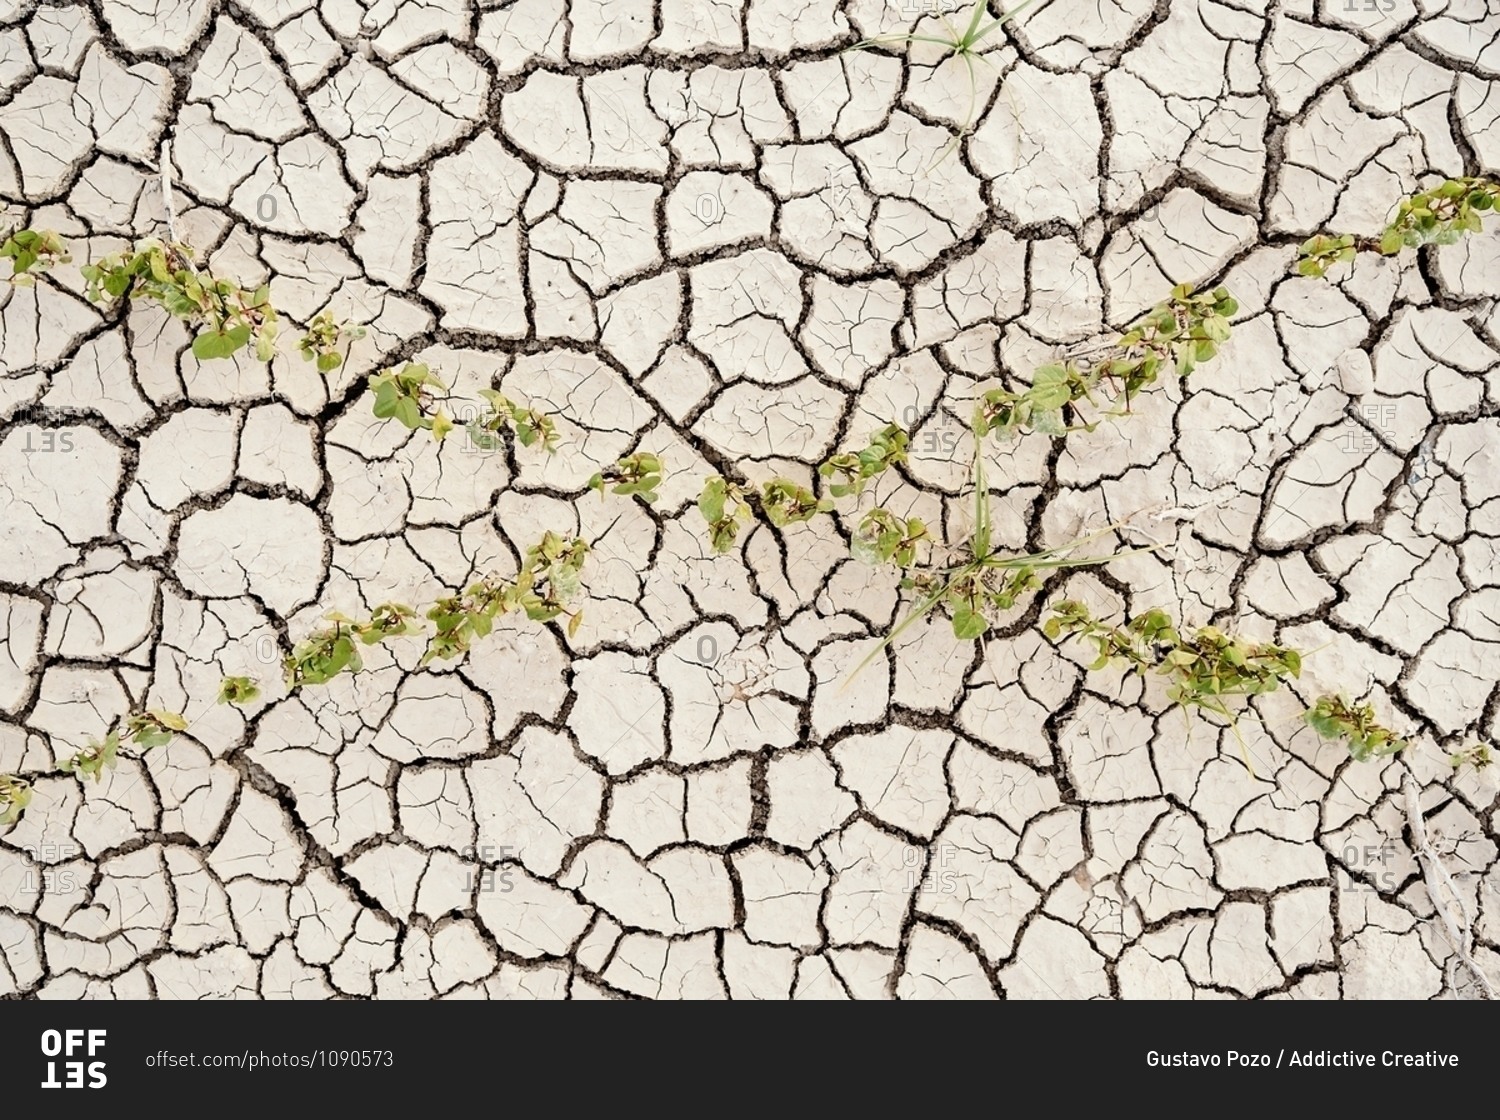 Rows of green seedlings growing in dried cracked waterless soil in agricultural field during drought